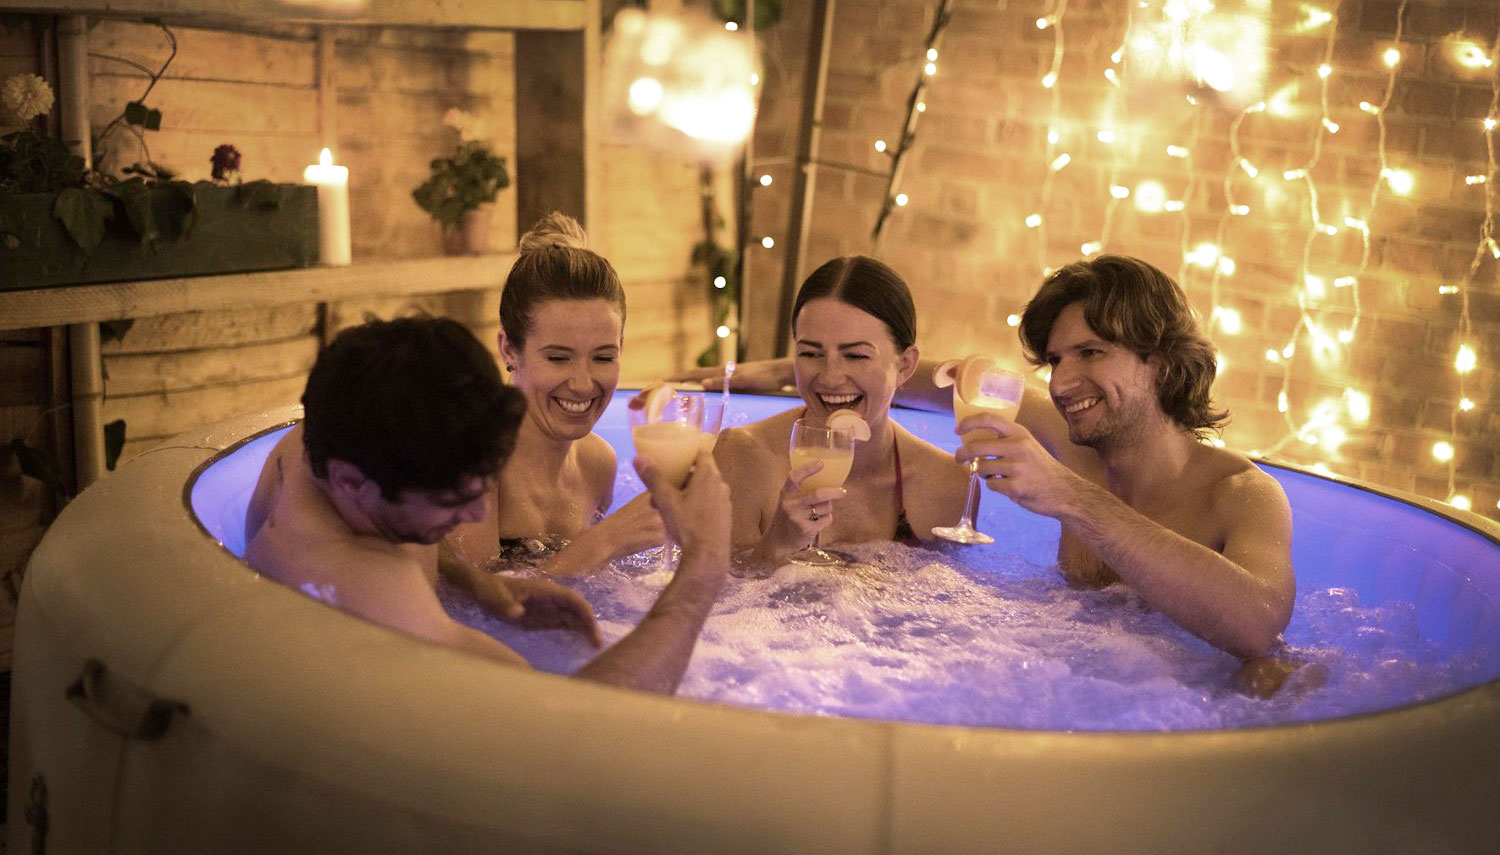 Lay-Z-Spa-Paris-Inflatable-Hot-Tub-Review-2016